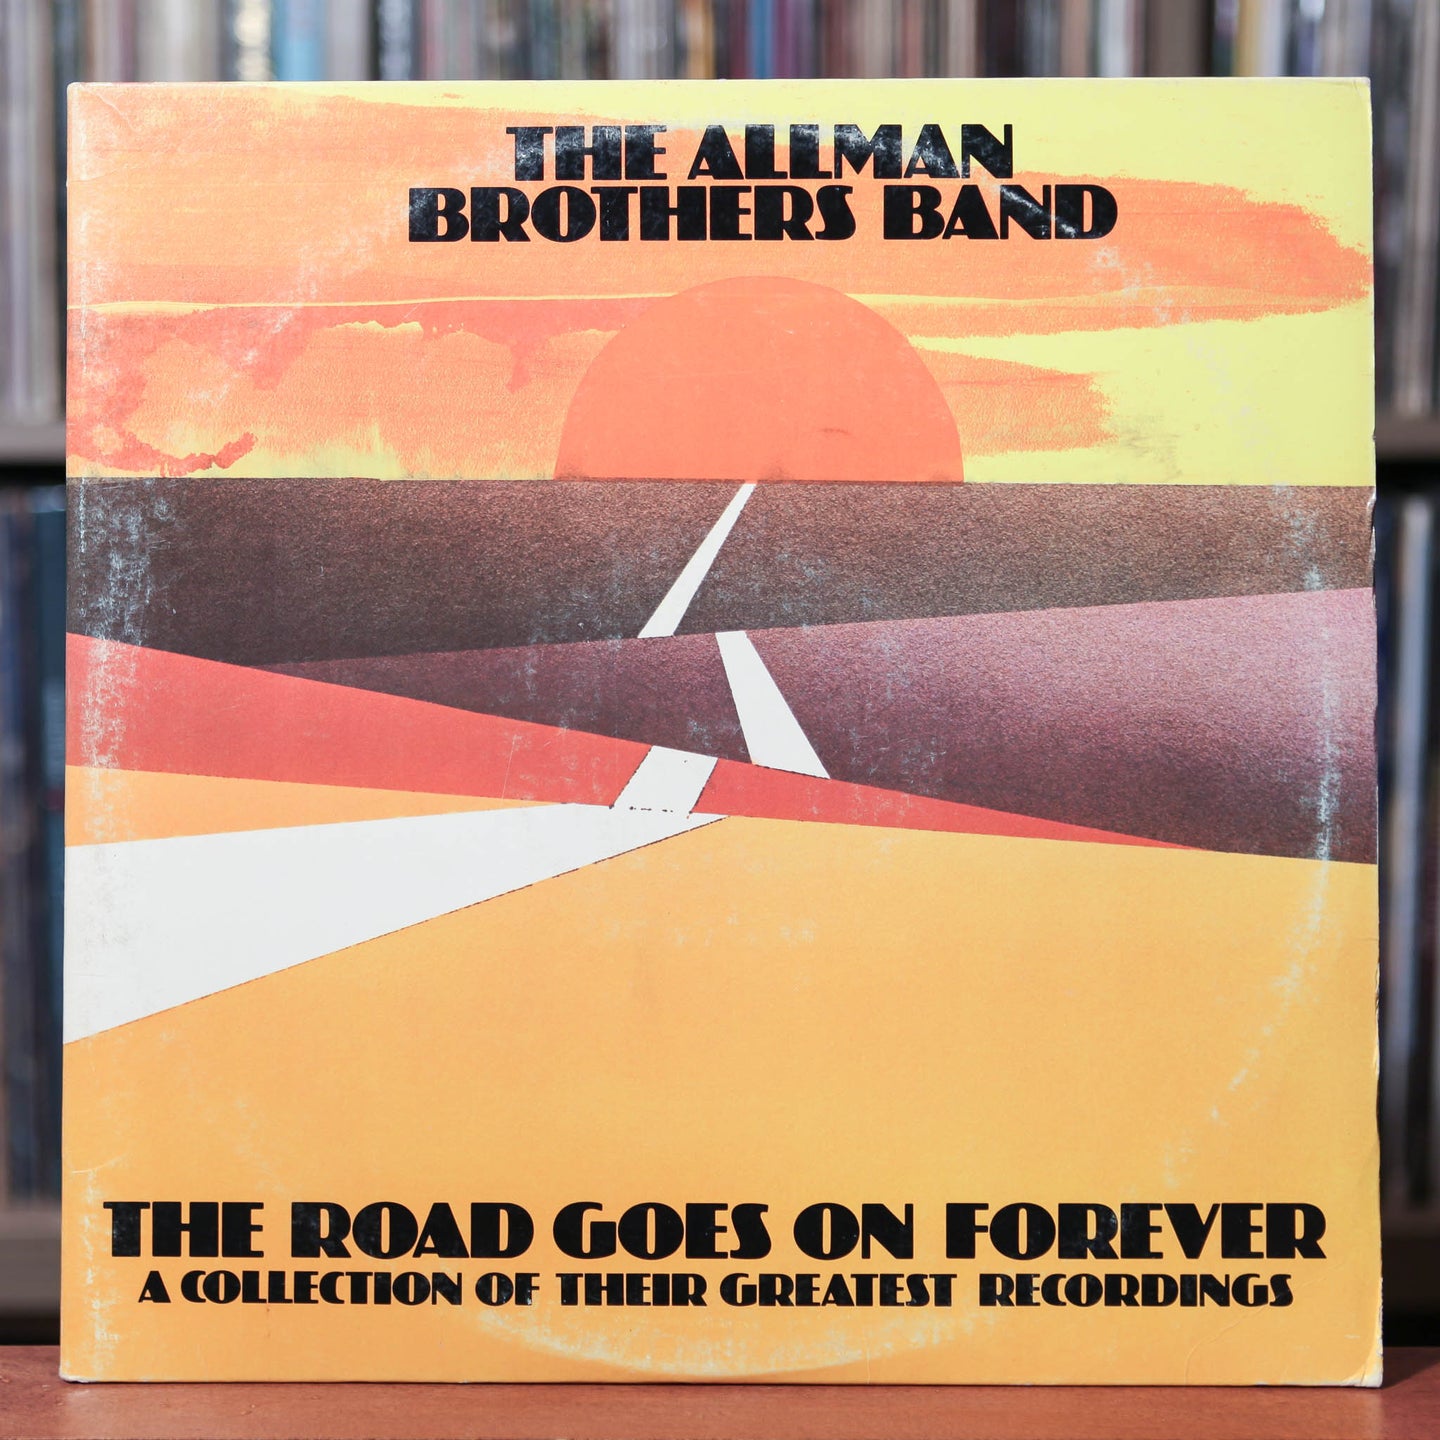 Allman Brothers - The Road Goes On Forever - 2LP - 1975 Capricorn, VG+/VG+